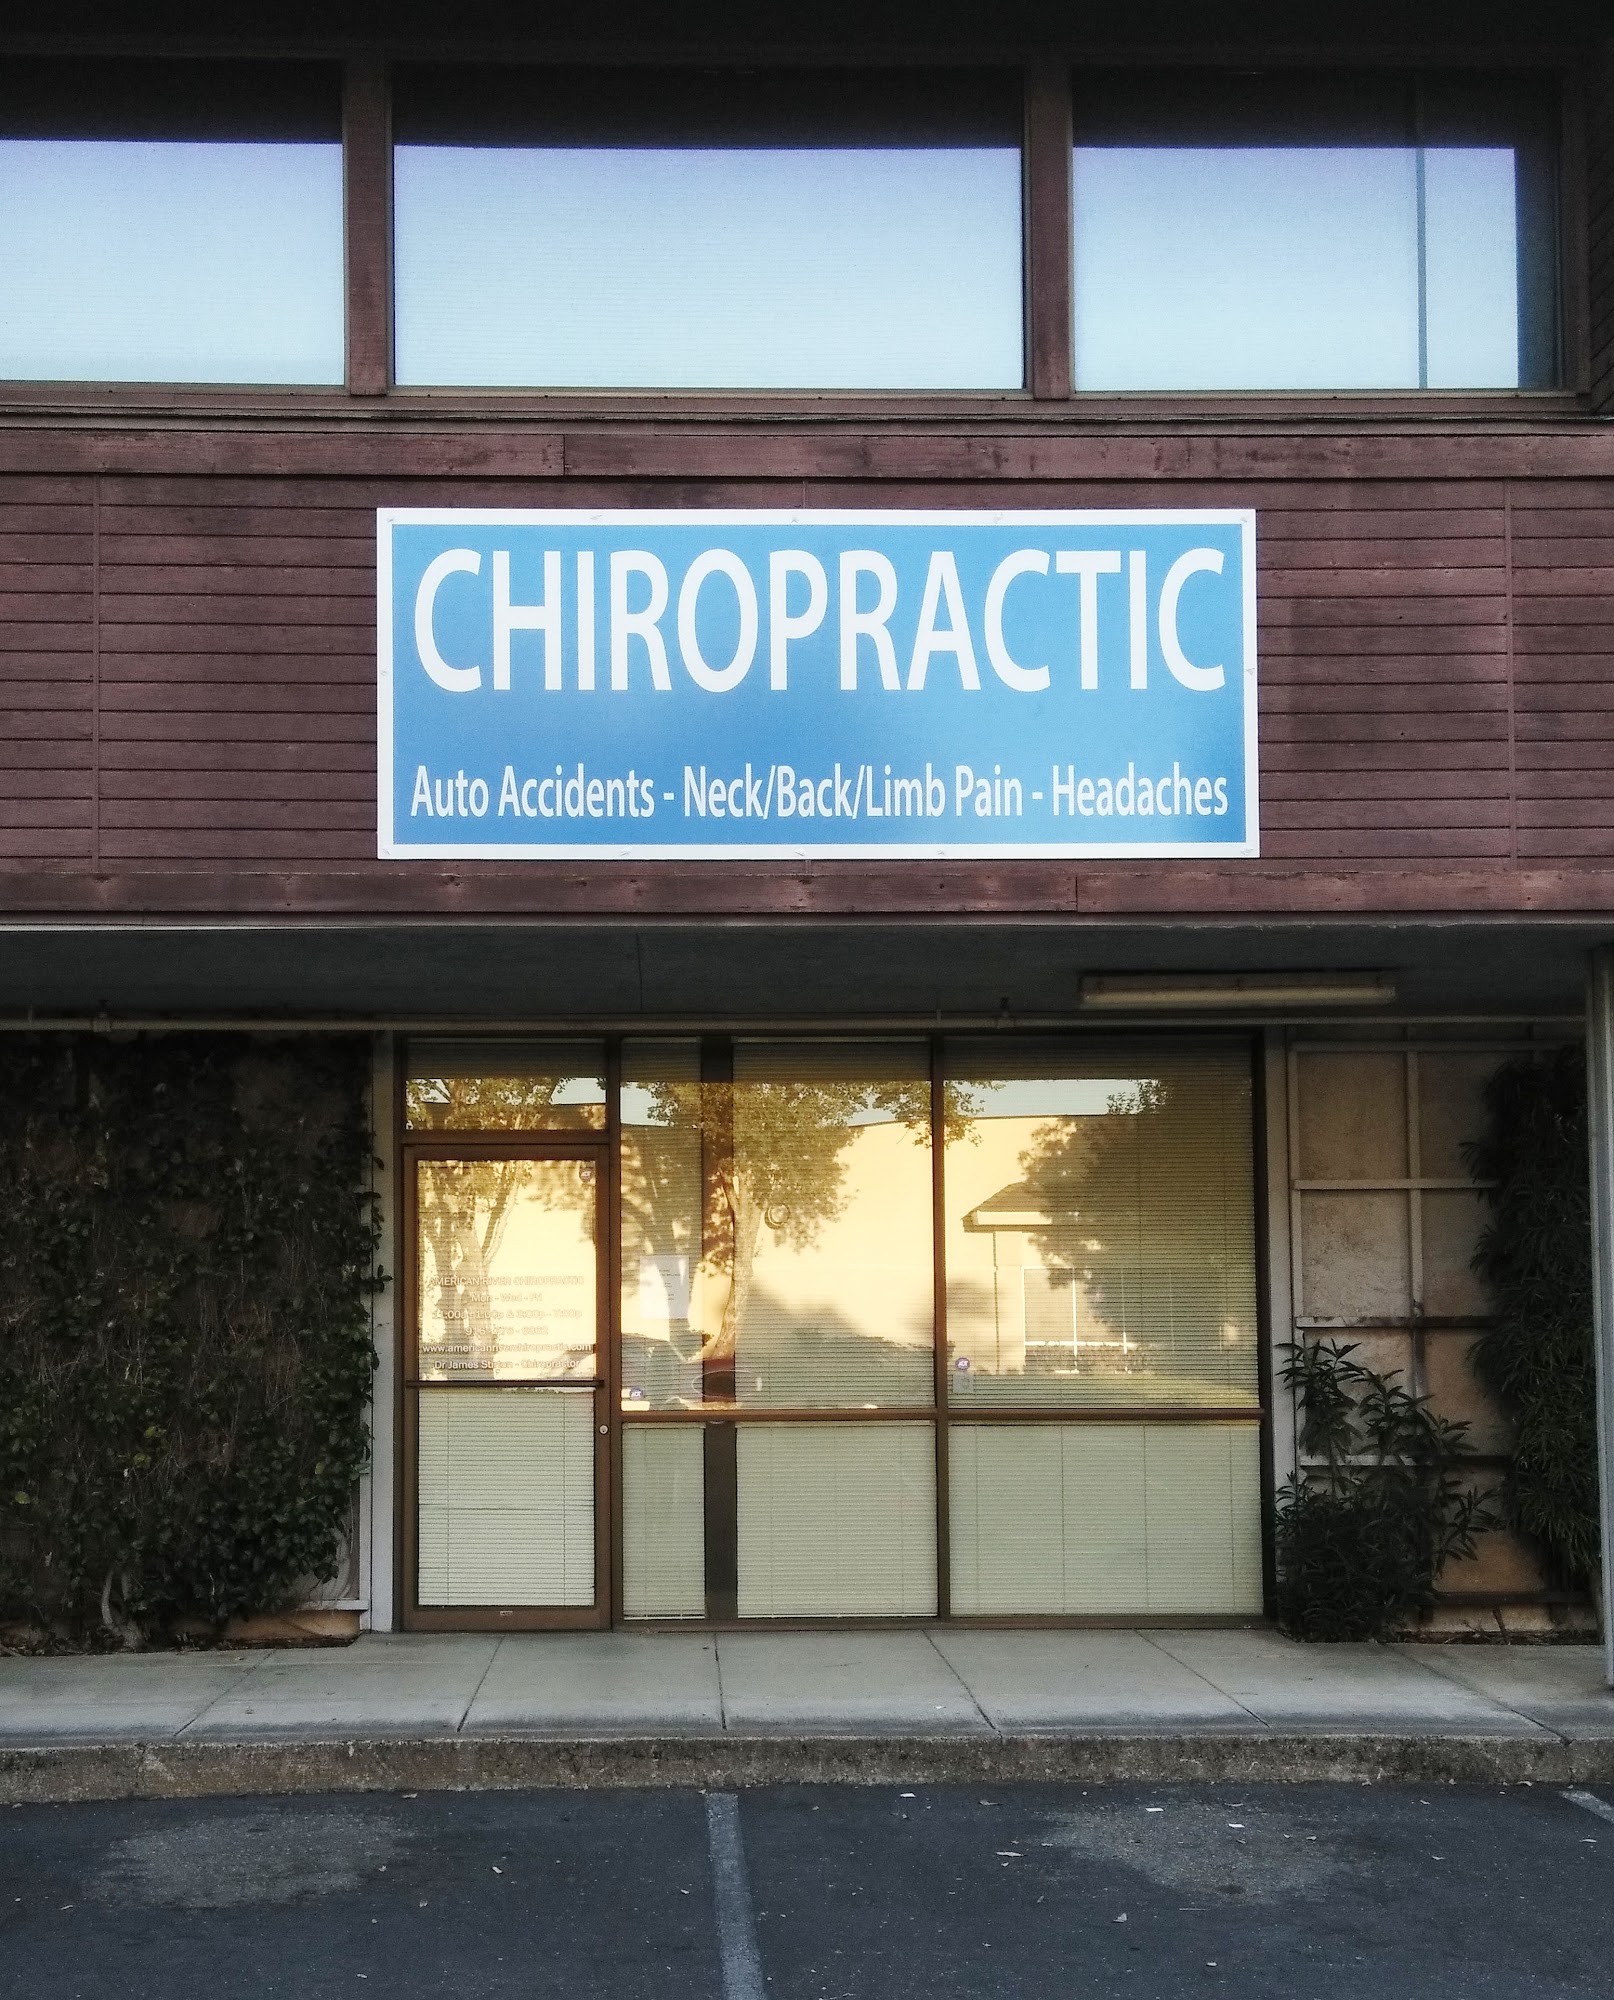 American River Chiropractic Office of Dr Stirton